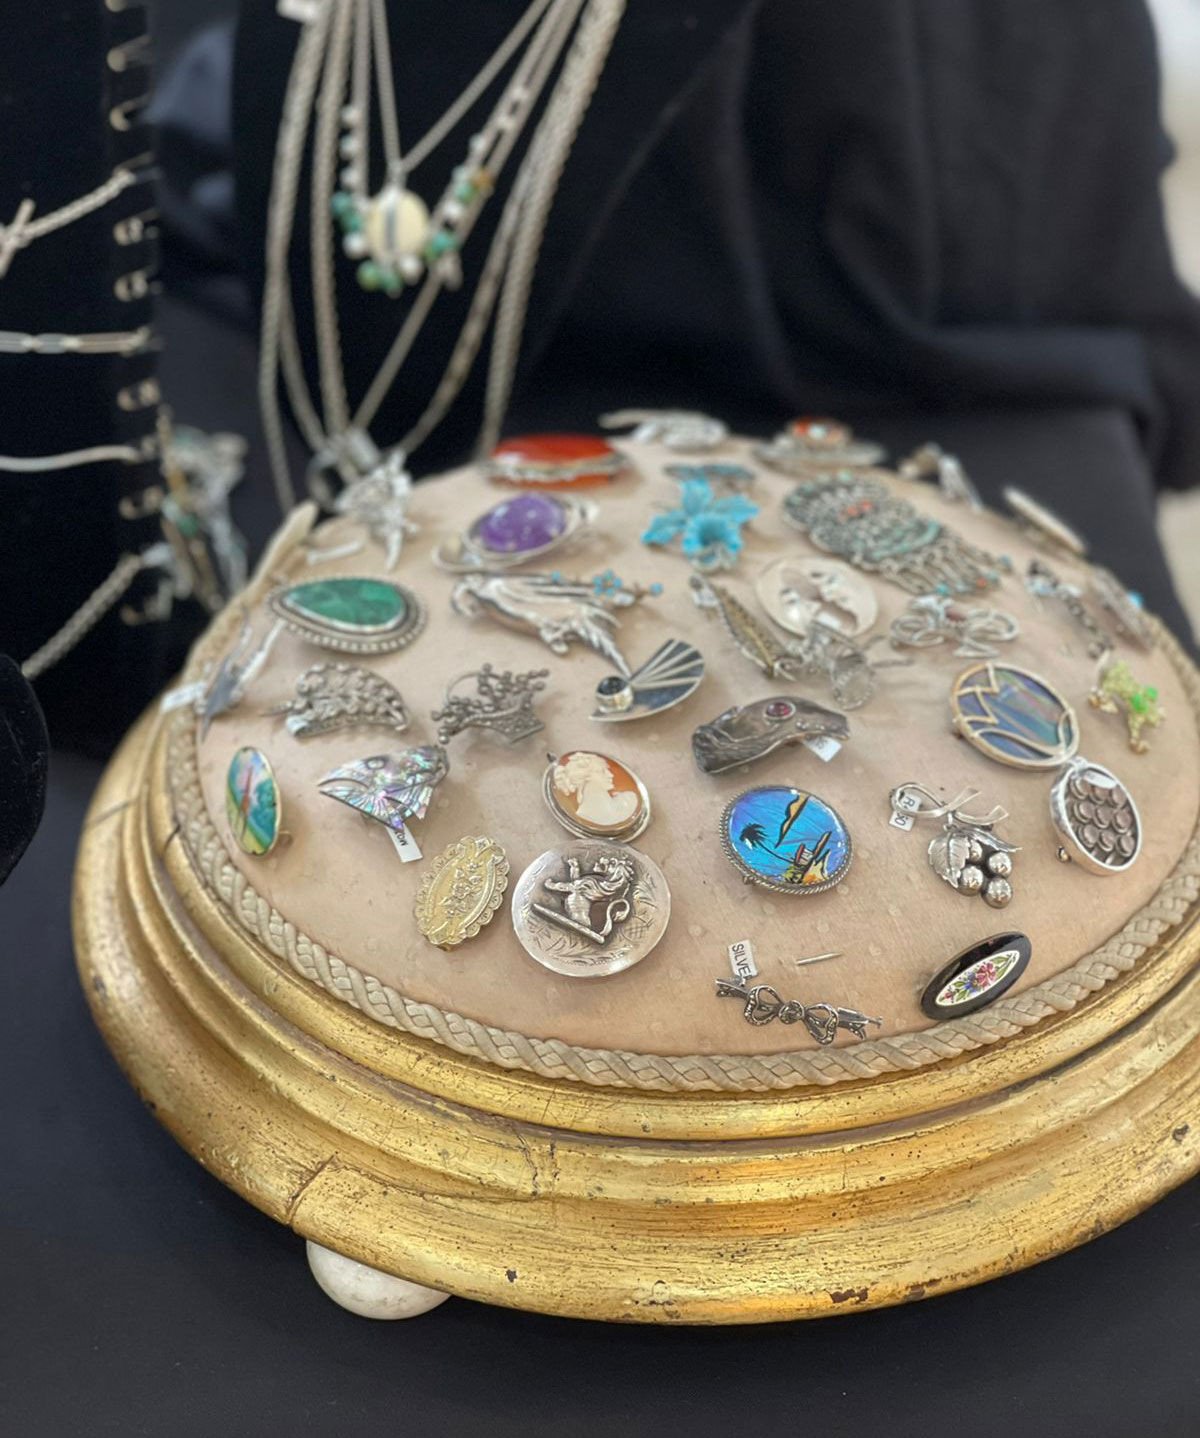 Shop for unusual treasures at Brooklyn Mall's monthly antique fair. Photo: Supplied.